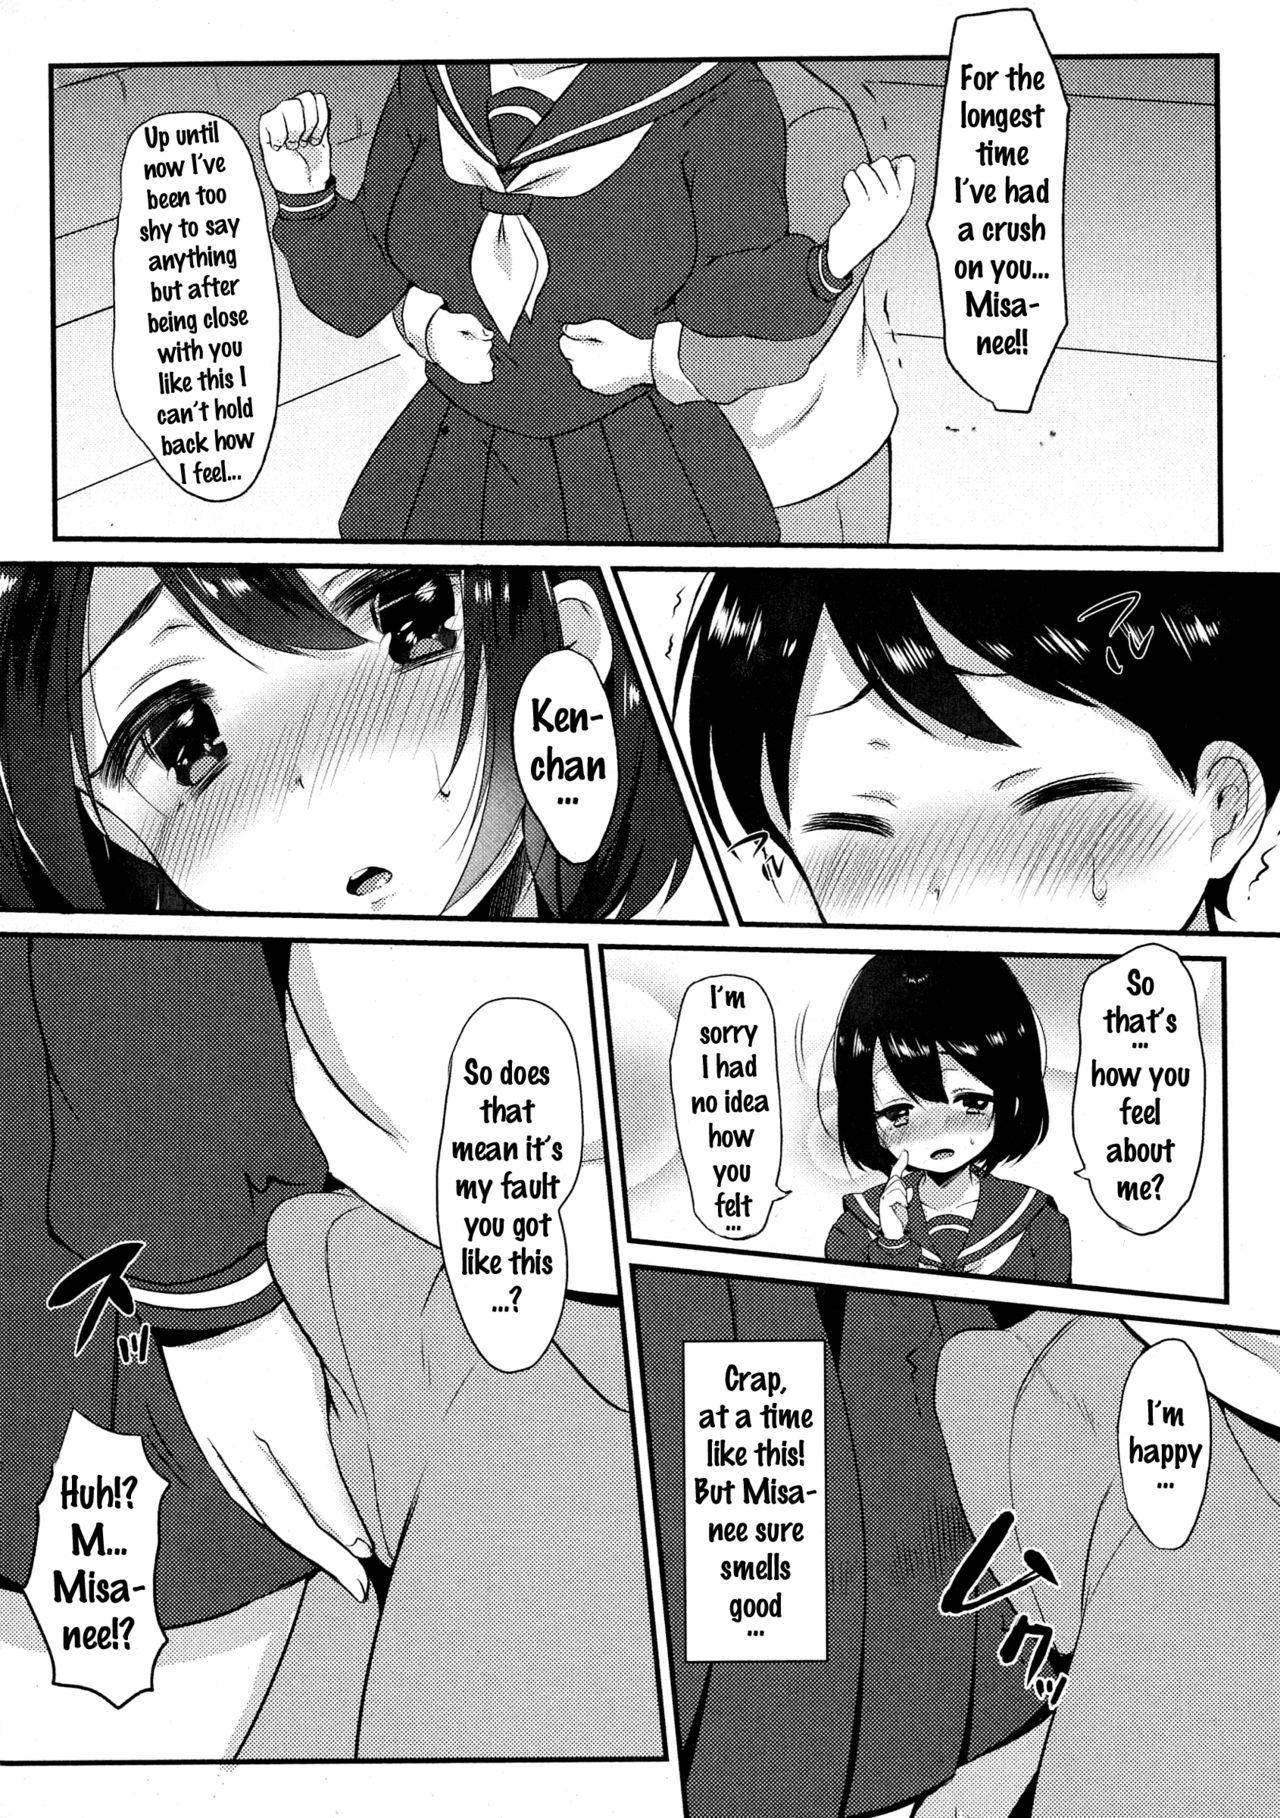 [Paragasu] Onee-san to Issho | Together with Onee-chan (COMIC JSCK Vol. 6) [English] {doujins.com} 3